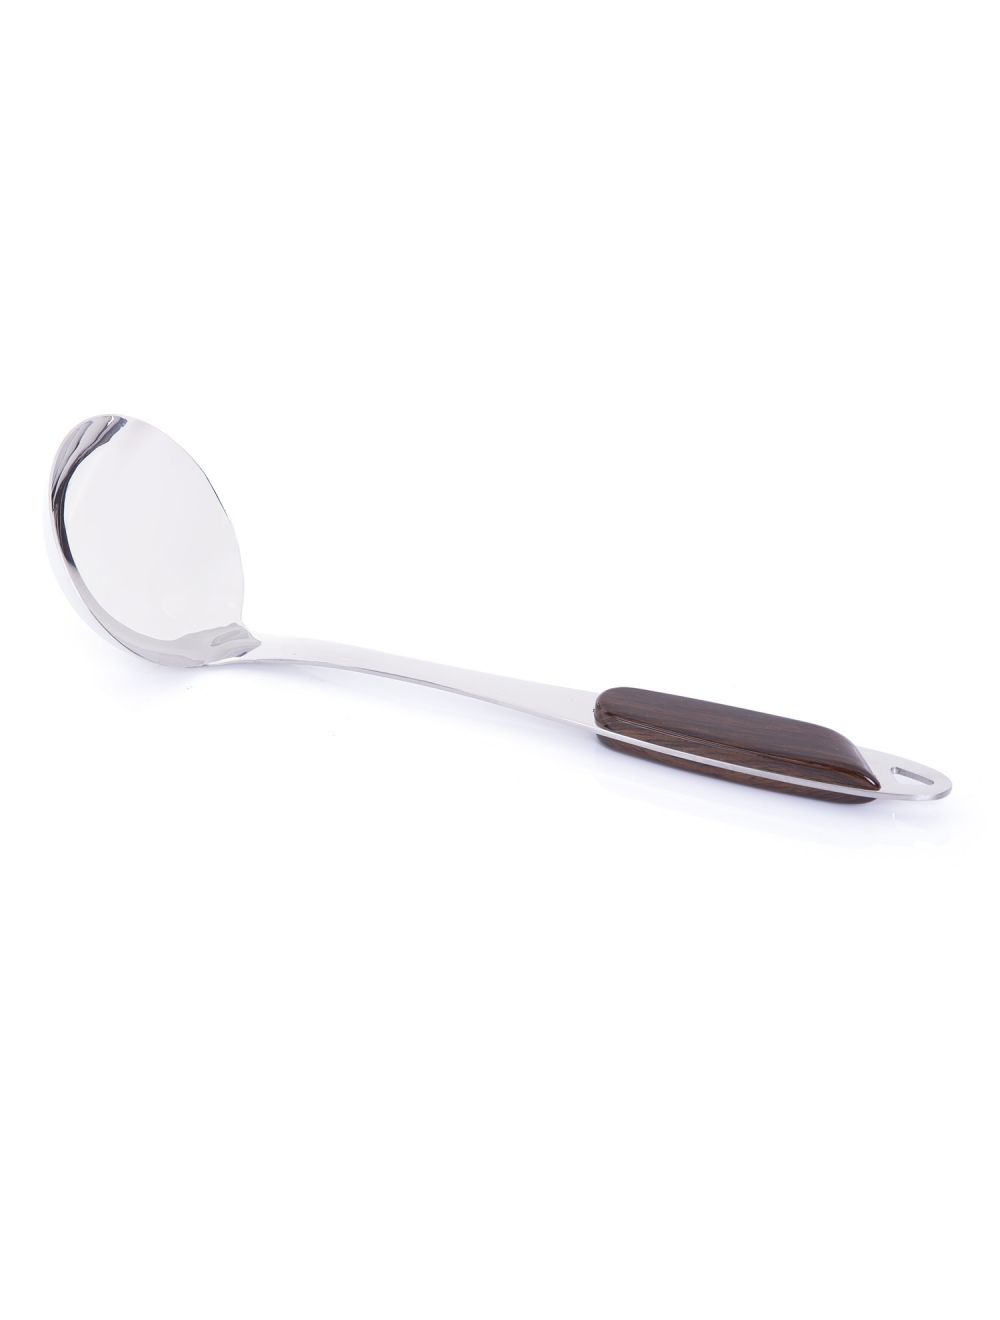 Royalford Stainless Steel Soup Spoon Silver